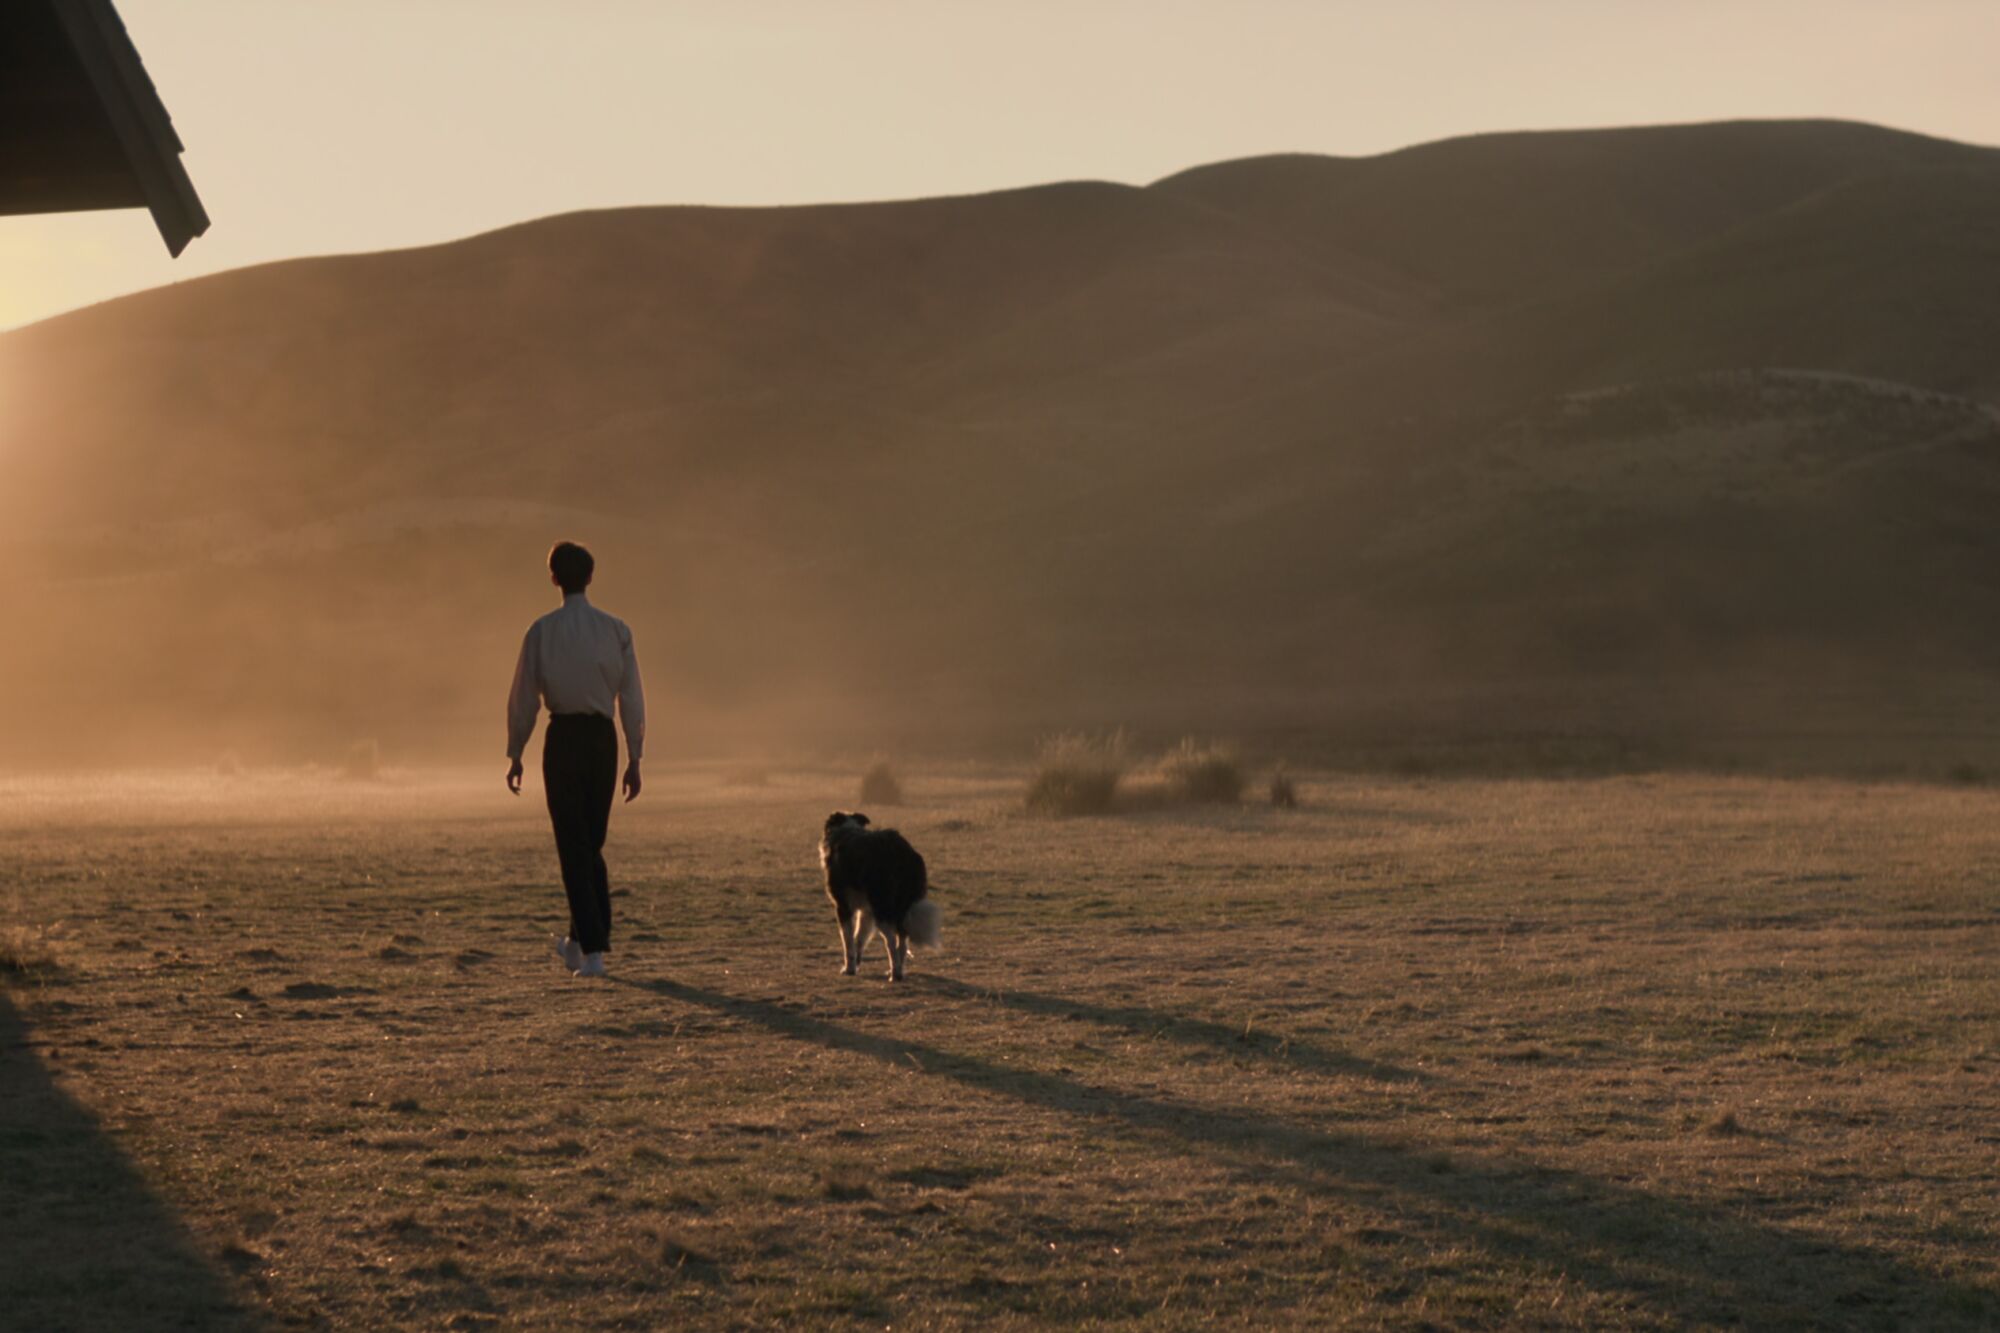 Kodi Smit-Mcphee as Peter walks away with a dog in “The Power of the Dog.” 